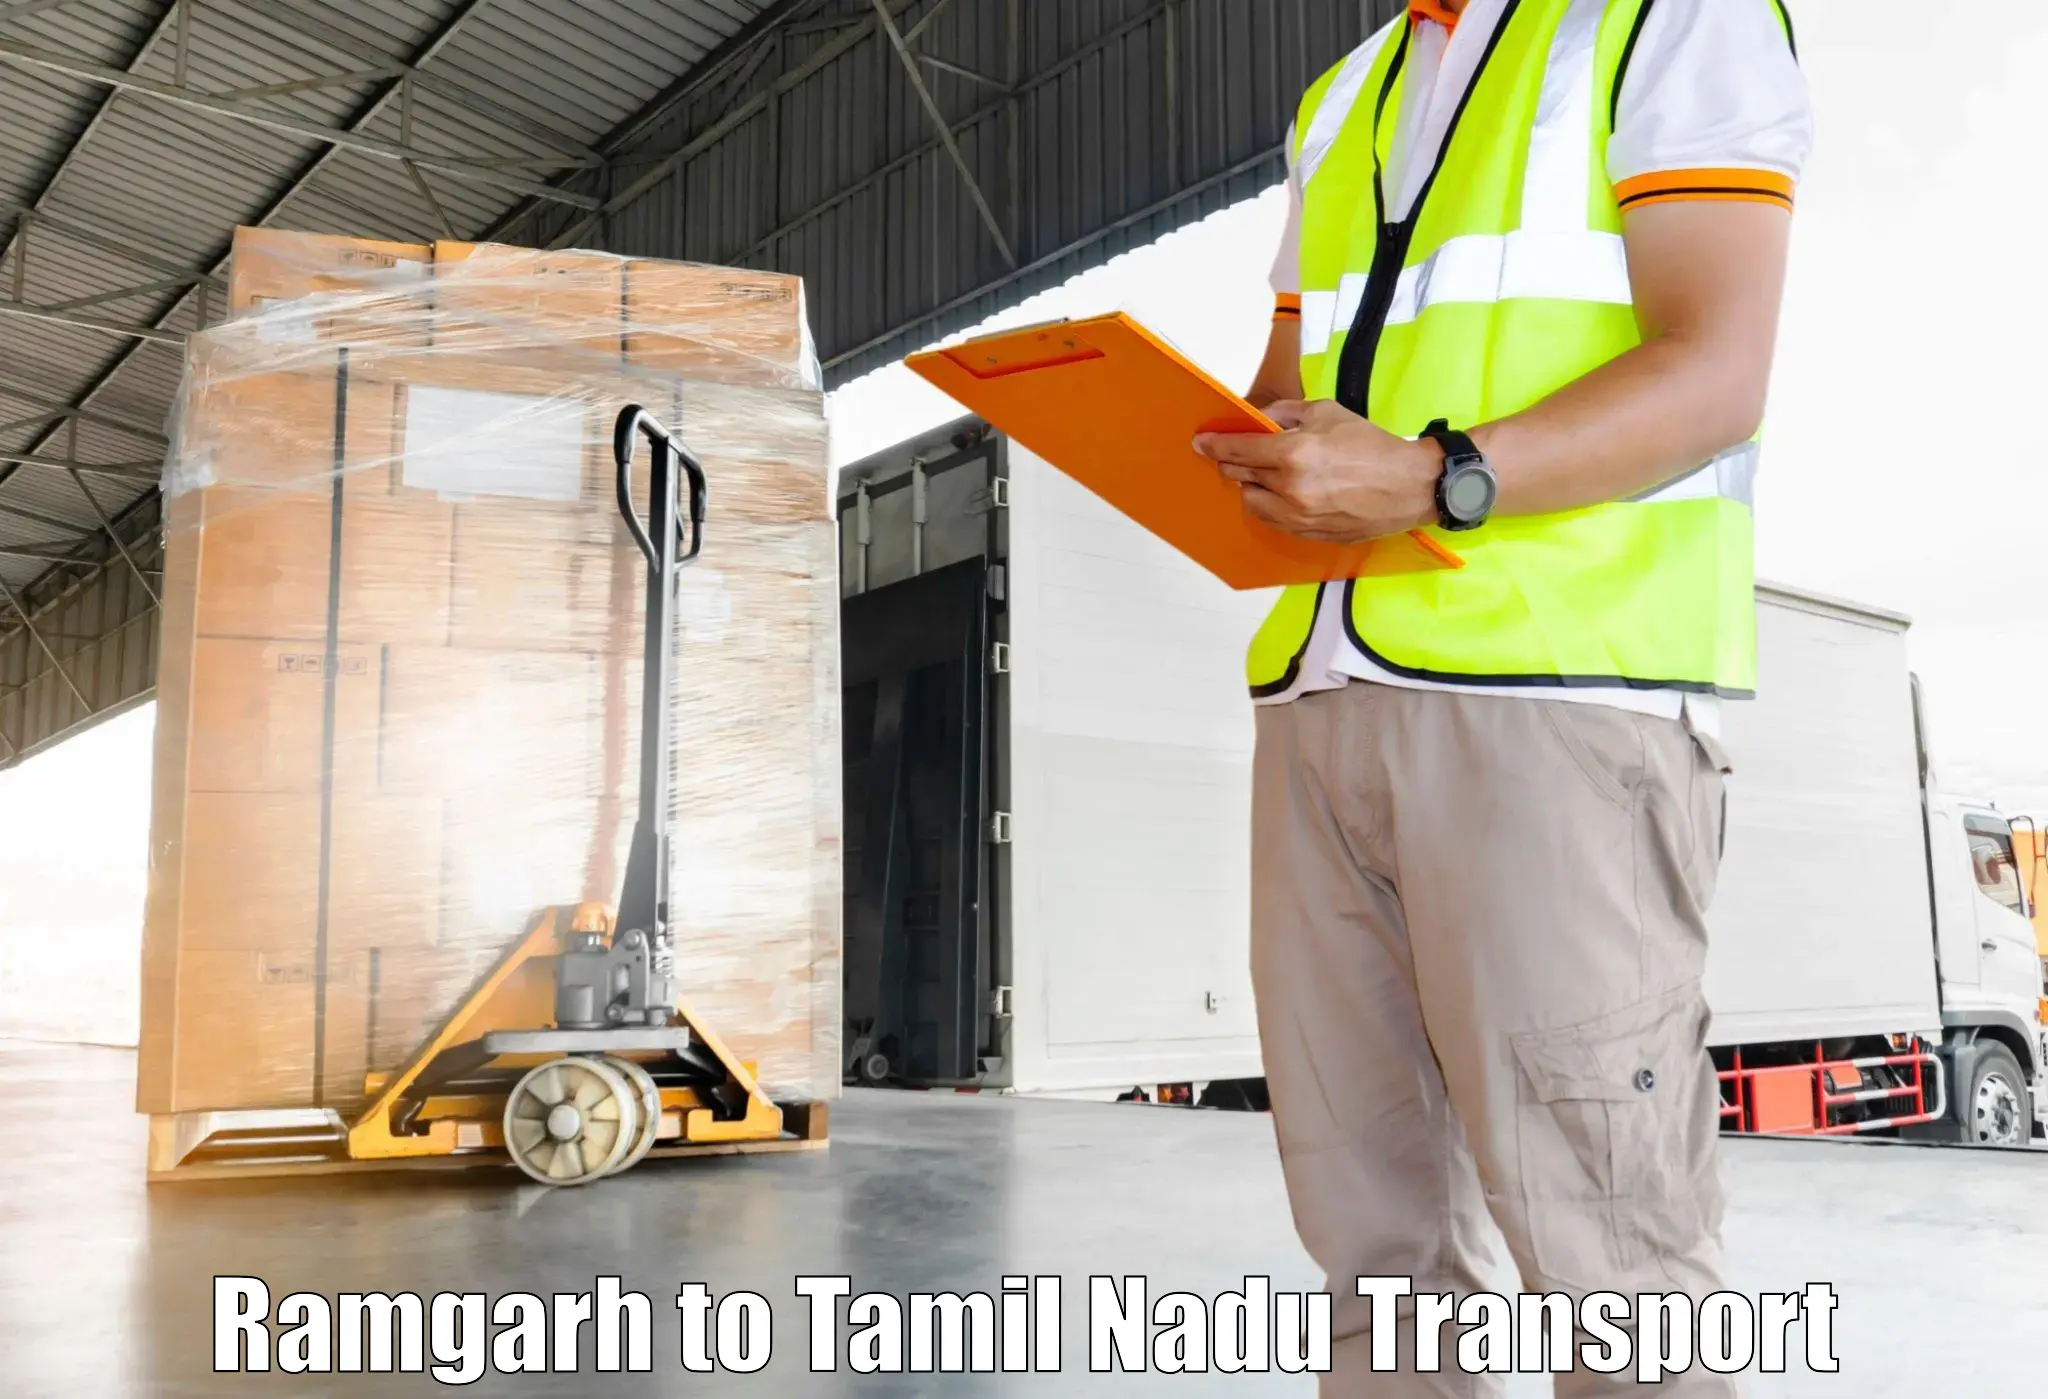 Delivery service Ramgarh to Rajapalayam